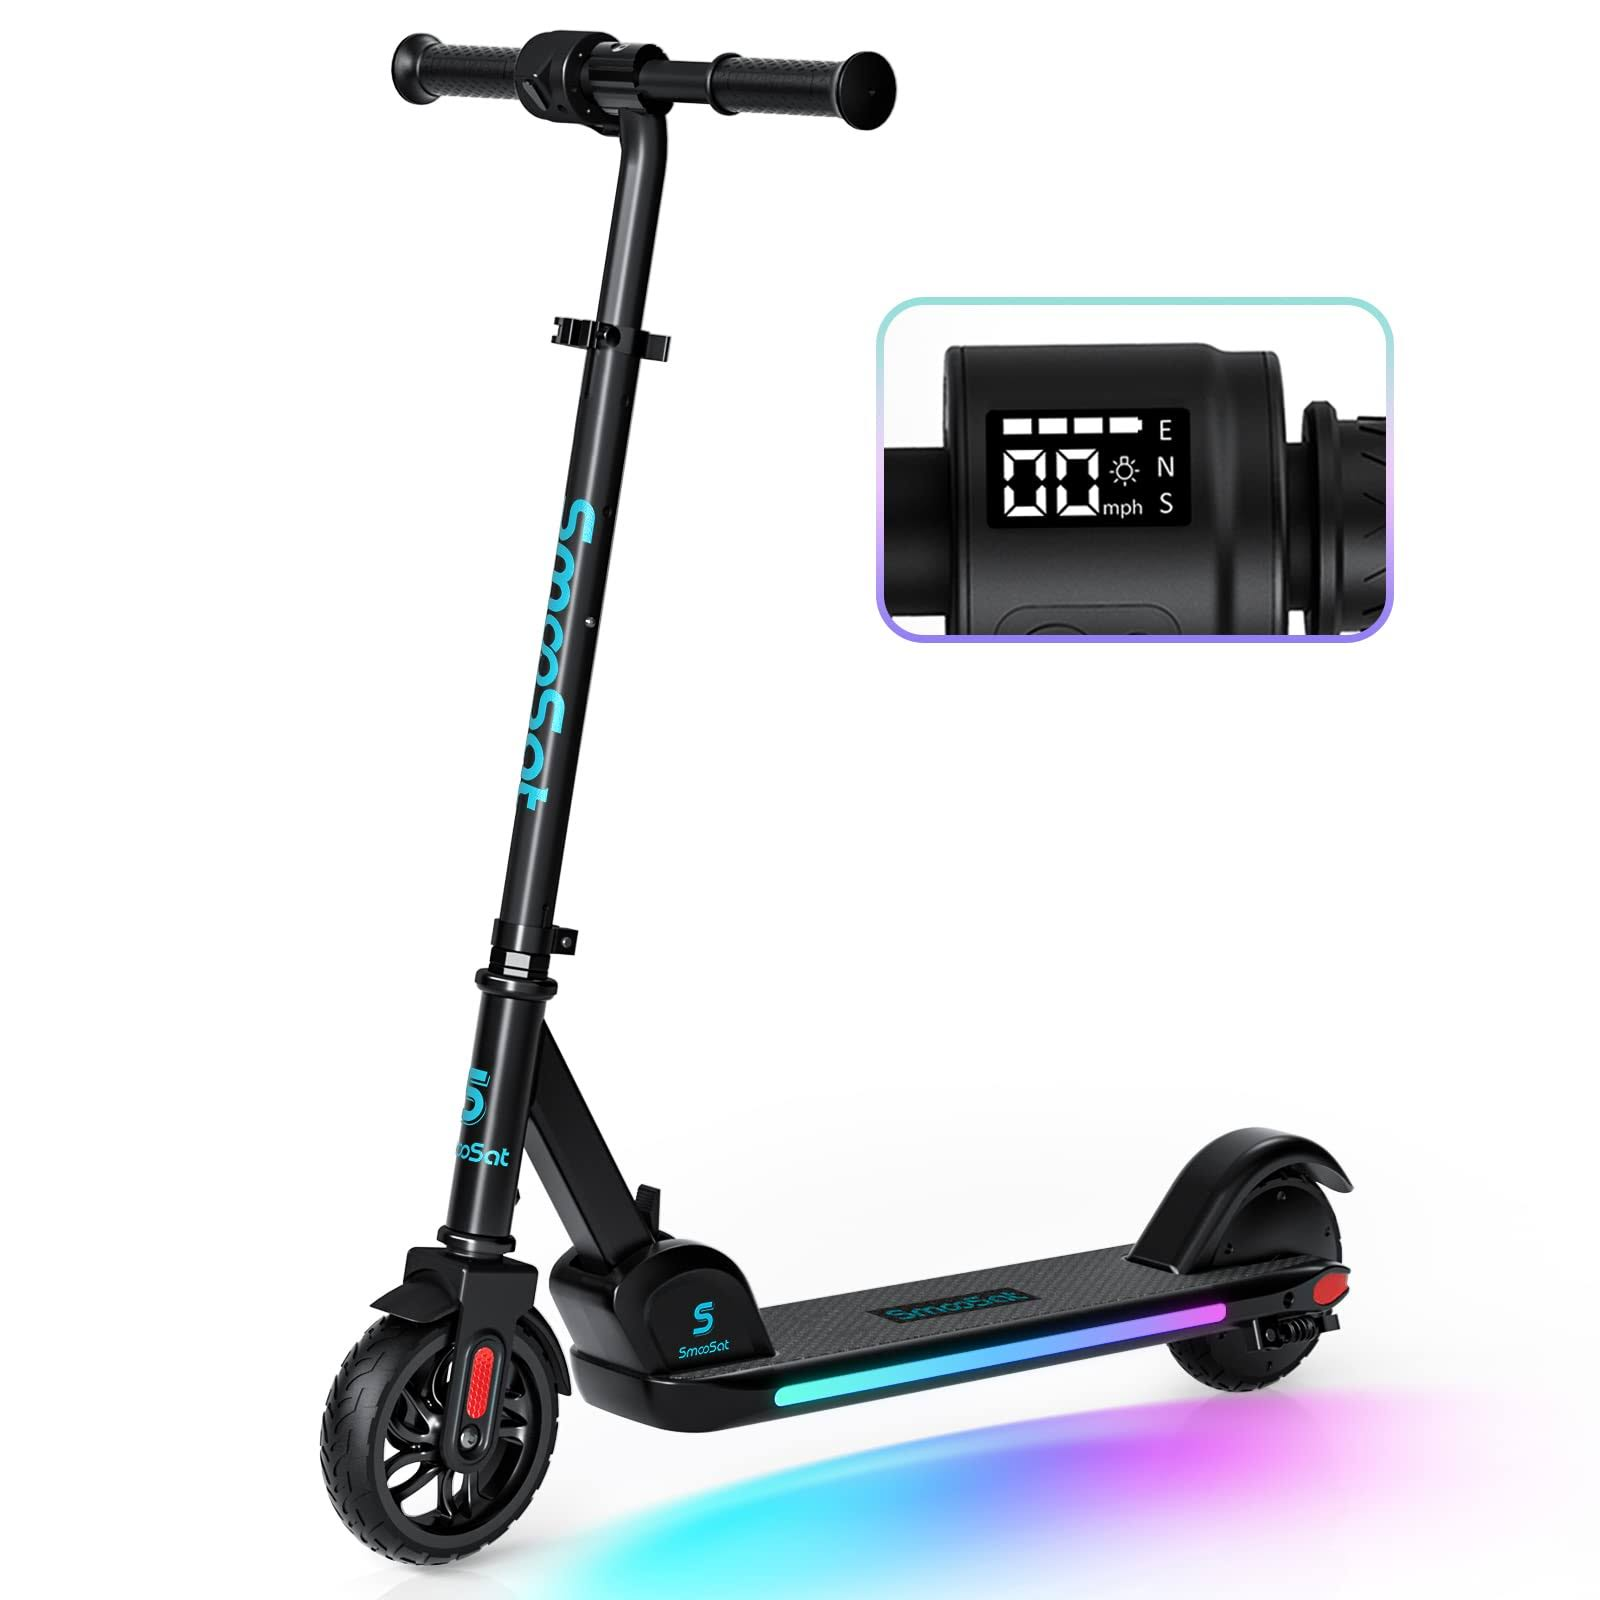 SmooSat E9 Pro Electric Scooter for Kids, Colorful Rainbow Lights, LED Display, Adjustable Speed and Height, Foldable and Lightweight Electric